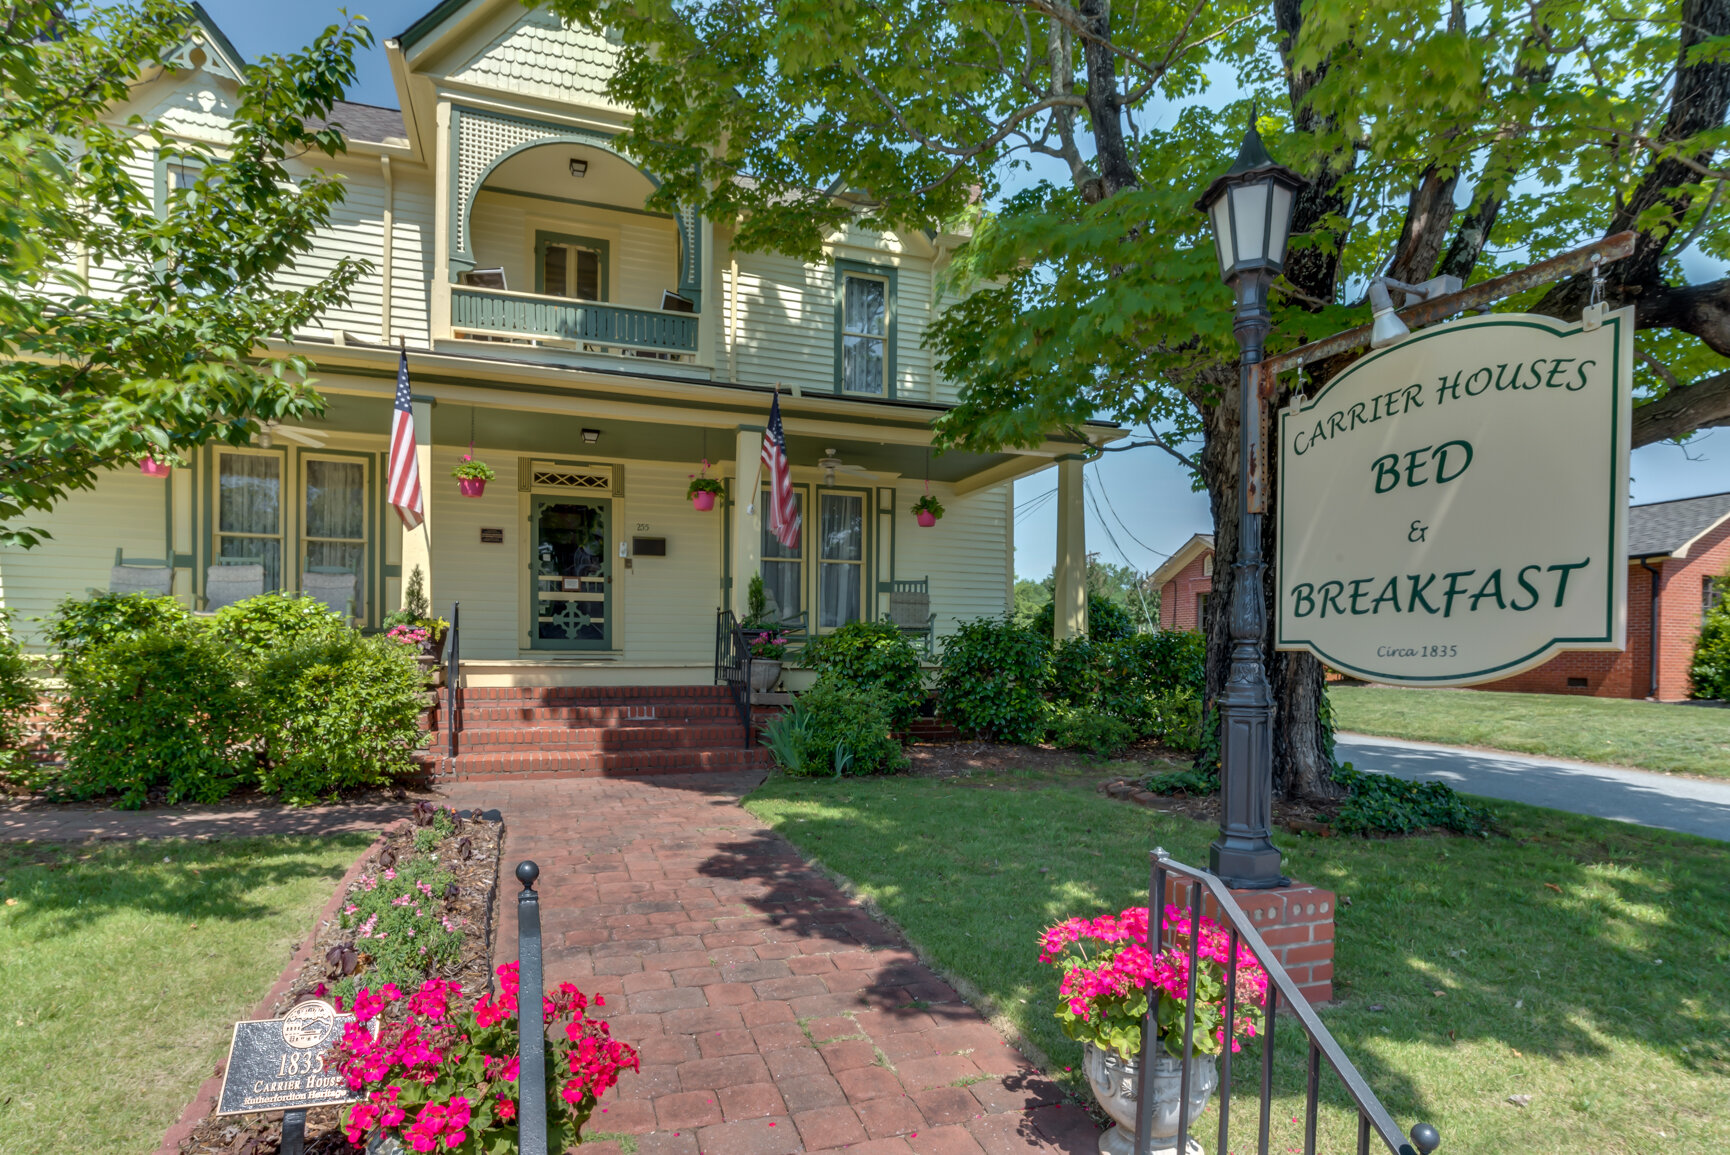 Carrier Houses Bed &amp; Breakfast - Rutherfordton, North Carolina (Copy)